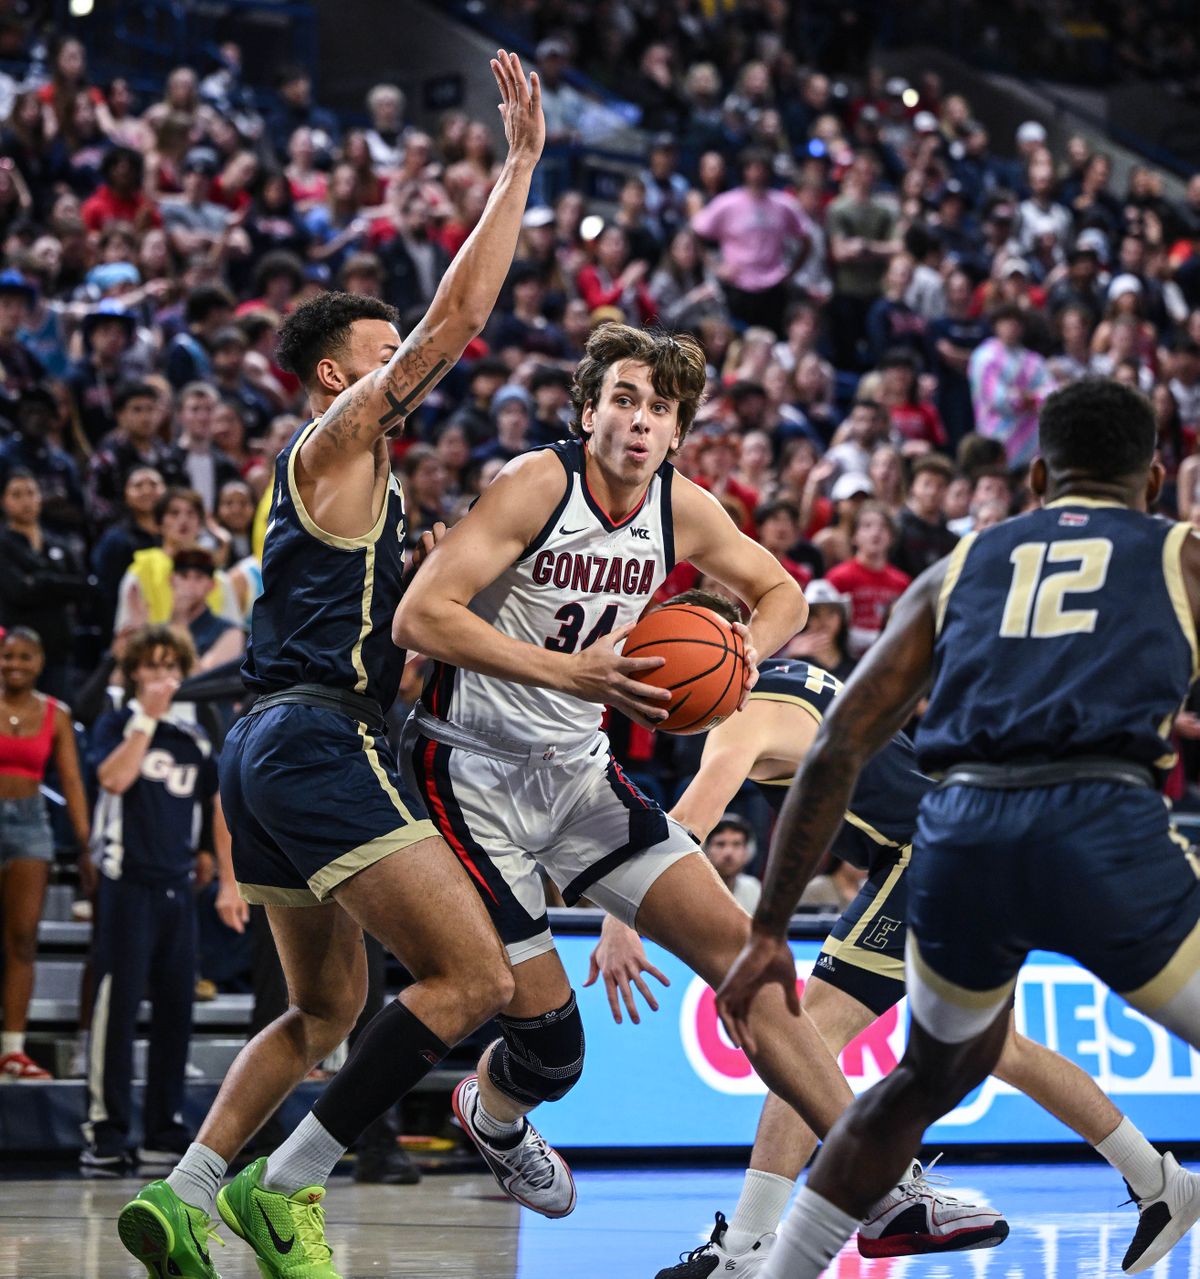 Gonzaga forward Braden Huff, who scored 23 points, makes a move against Eastern Oregon’s Brennen Newsom during the first half Tuesday.  (By Colin Mulvany/The Spokesman-Review)